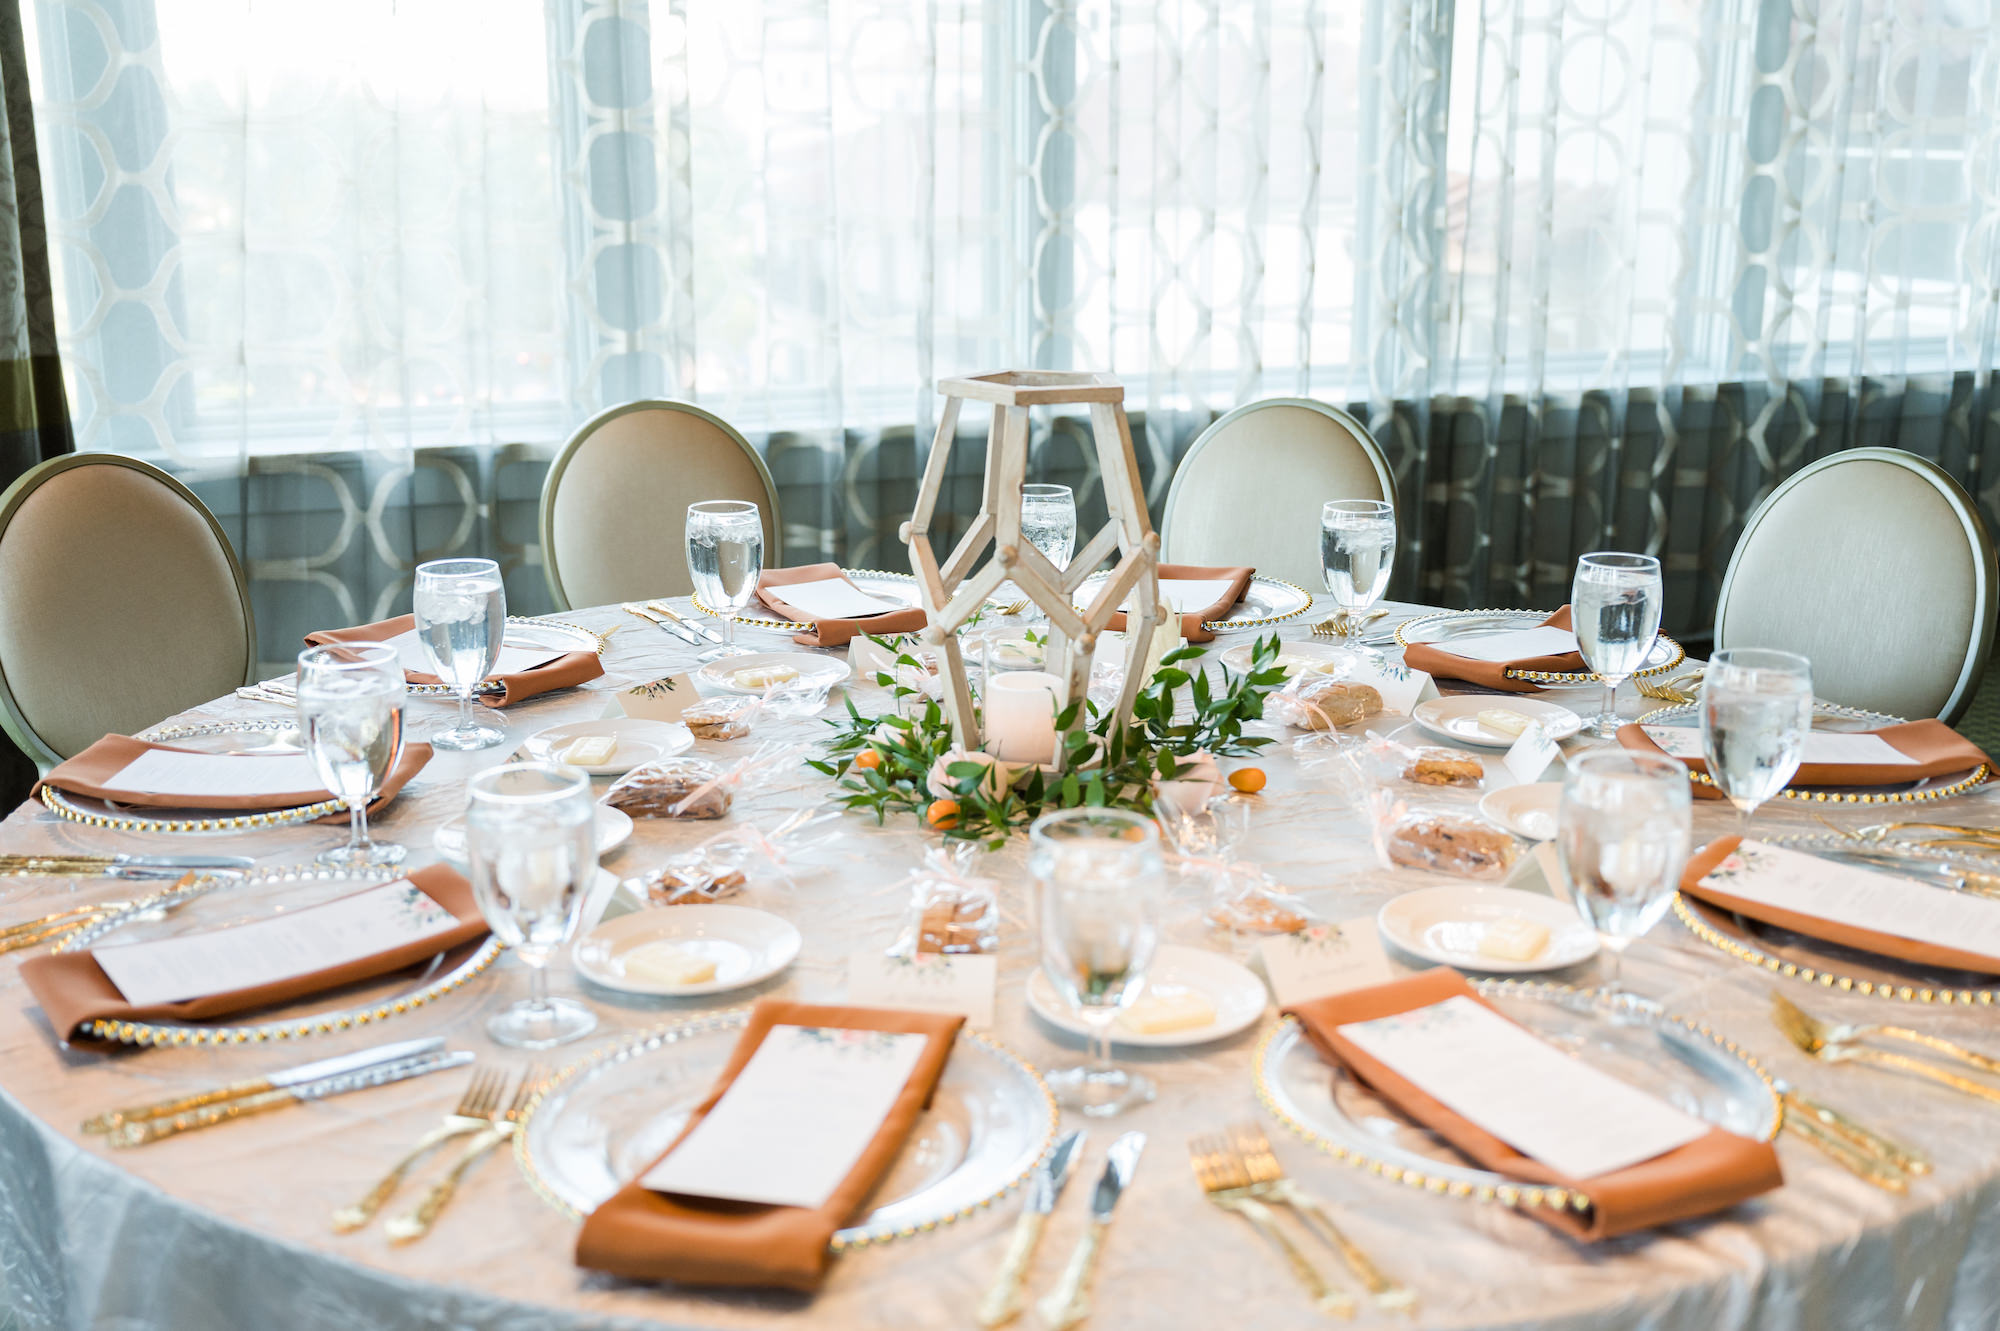 Classic White Linen Reception Tablescape with Greenery and Gold Detail with Peach Napkins and Birchwood Centerpieces | Tampa Bay Wedding Rentals Outside the Box Event Rentals